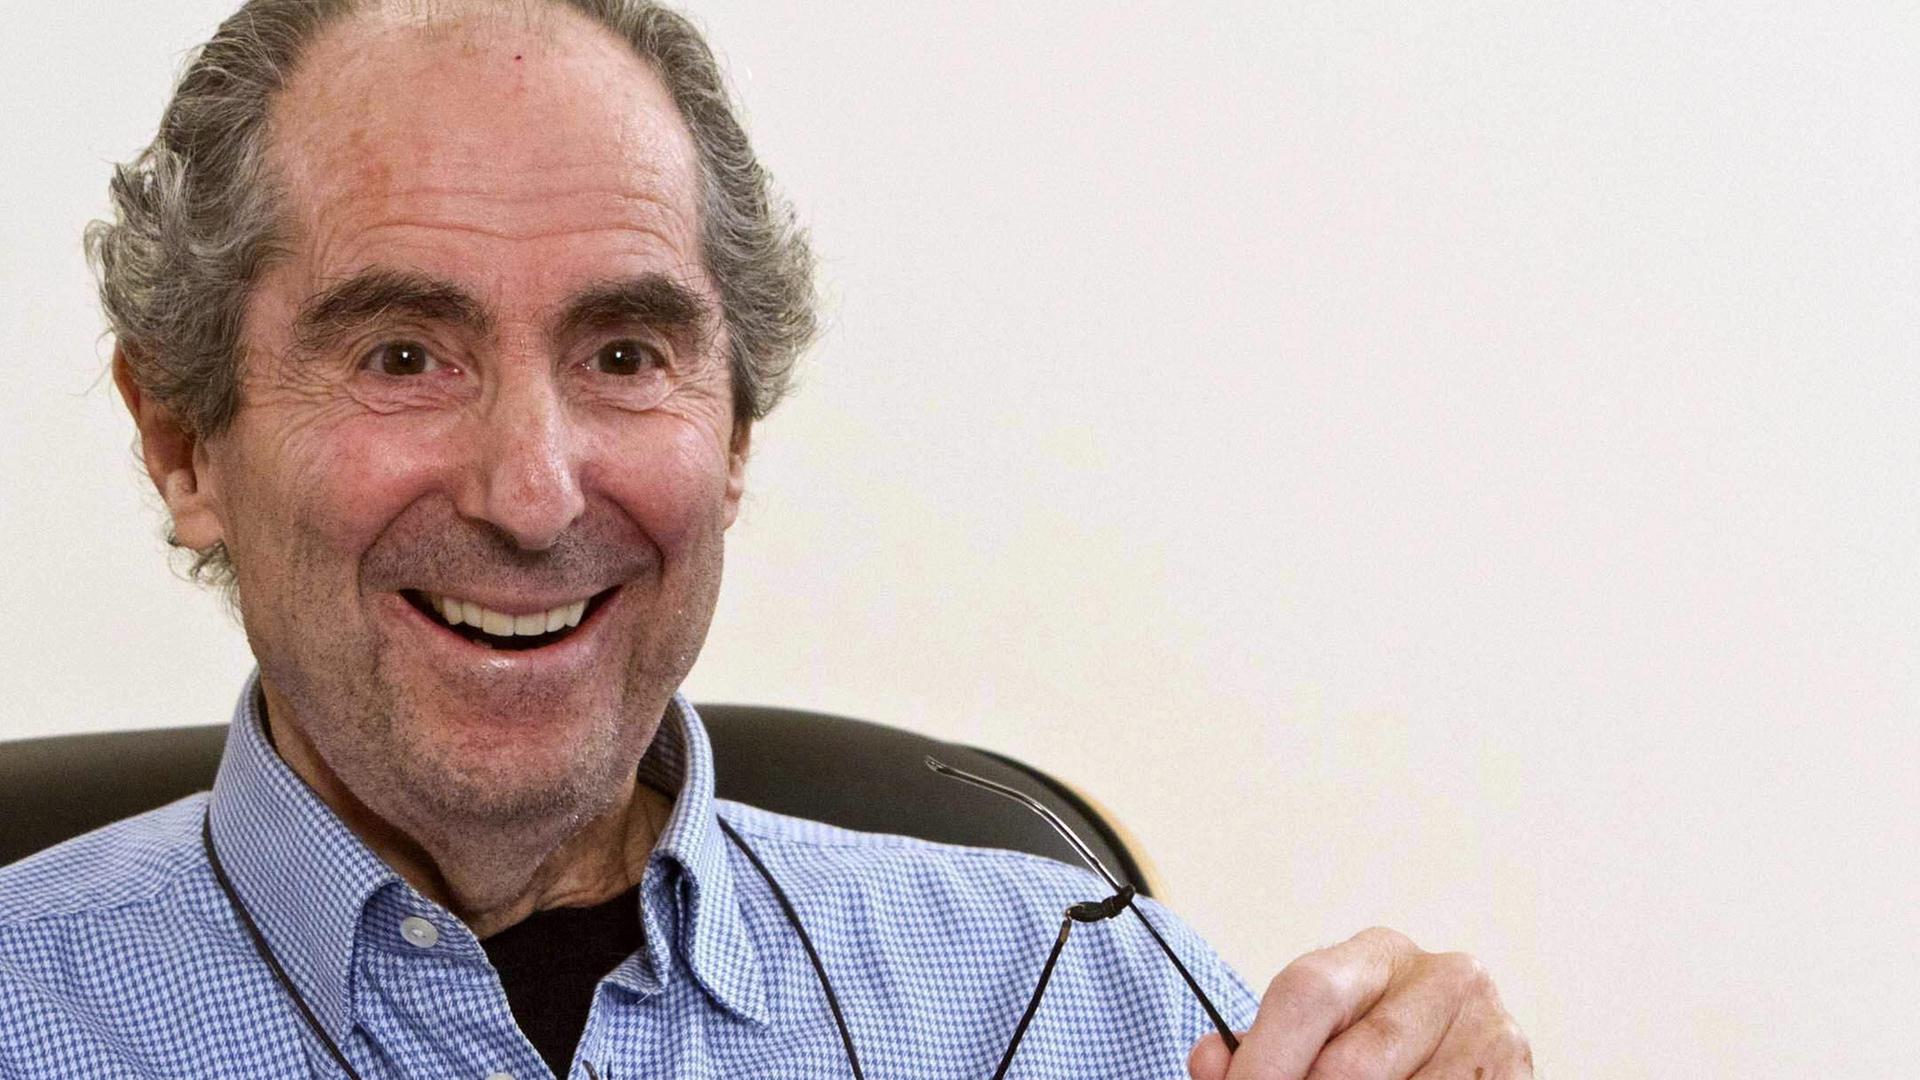 US writer Philip Roth, winner of 2012 Prince of Asturias Award for Literature, offers an interview to Agencia EFE press agency at his apartment in New York, USA, 22 October 2012. The writer of 'I Married a Communist' and 'The Human Stain', among others, w